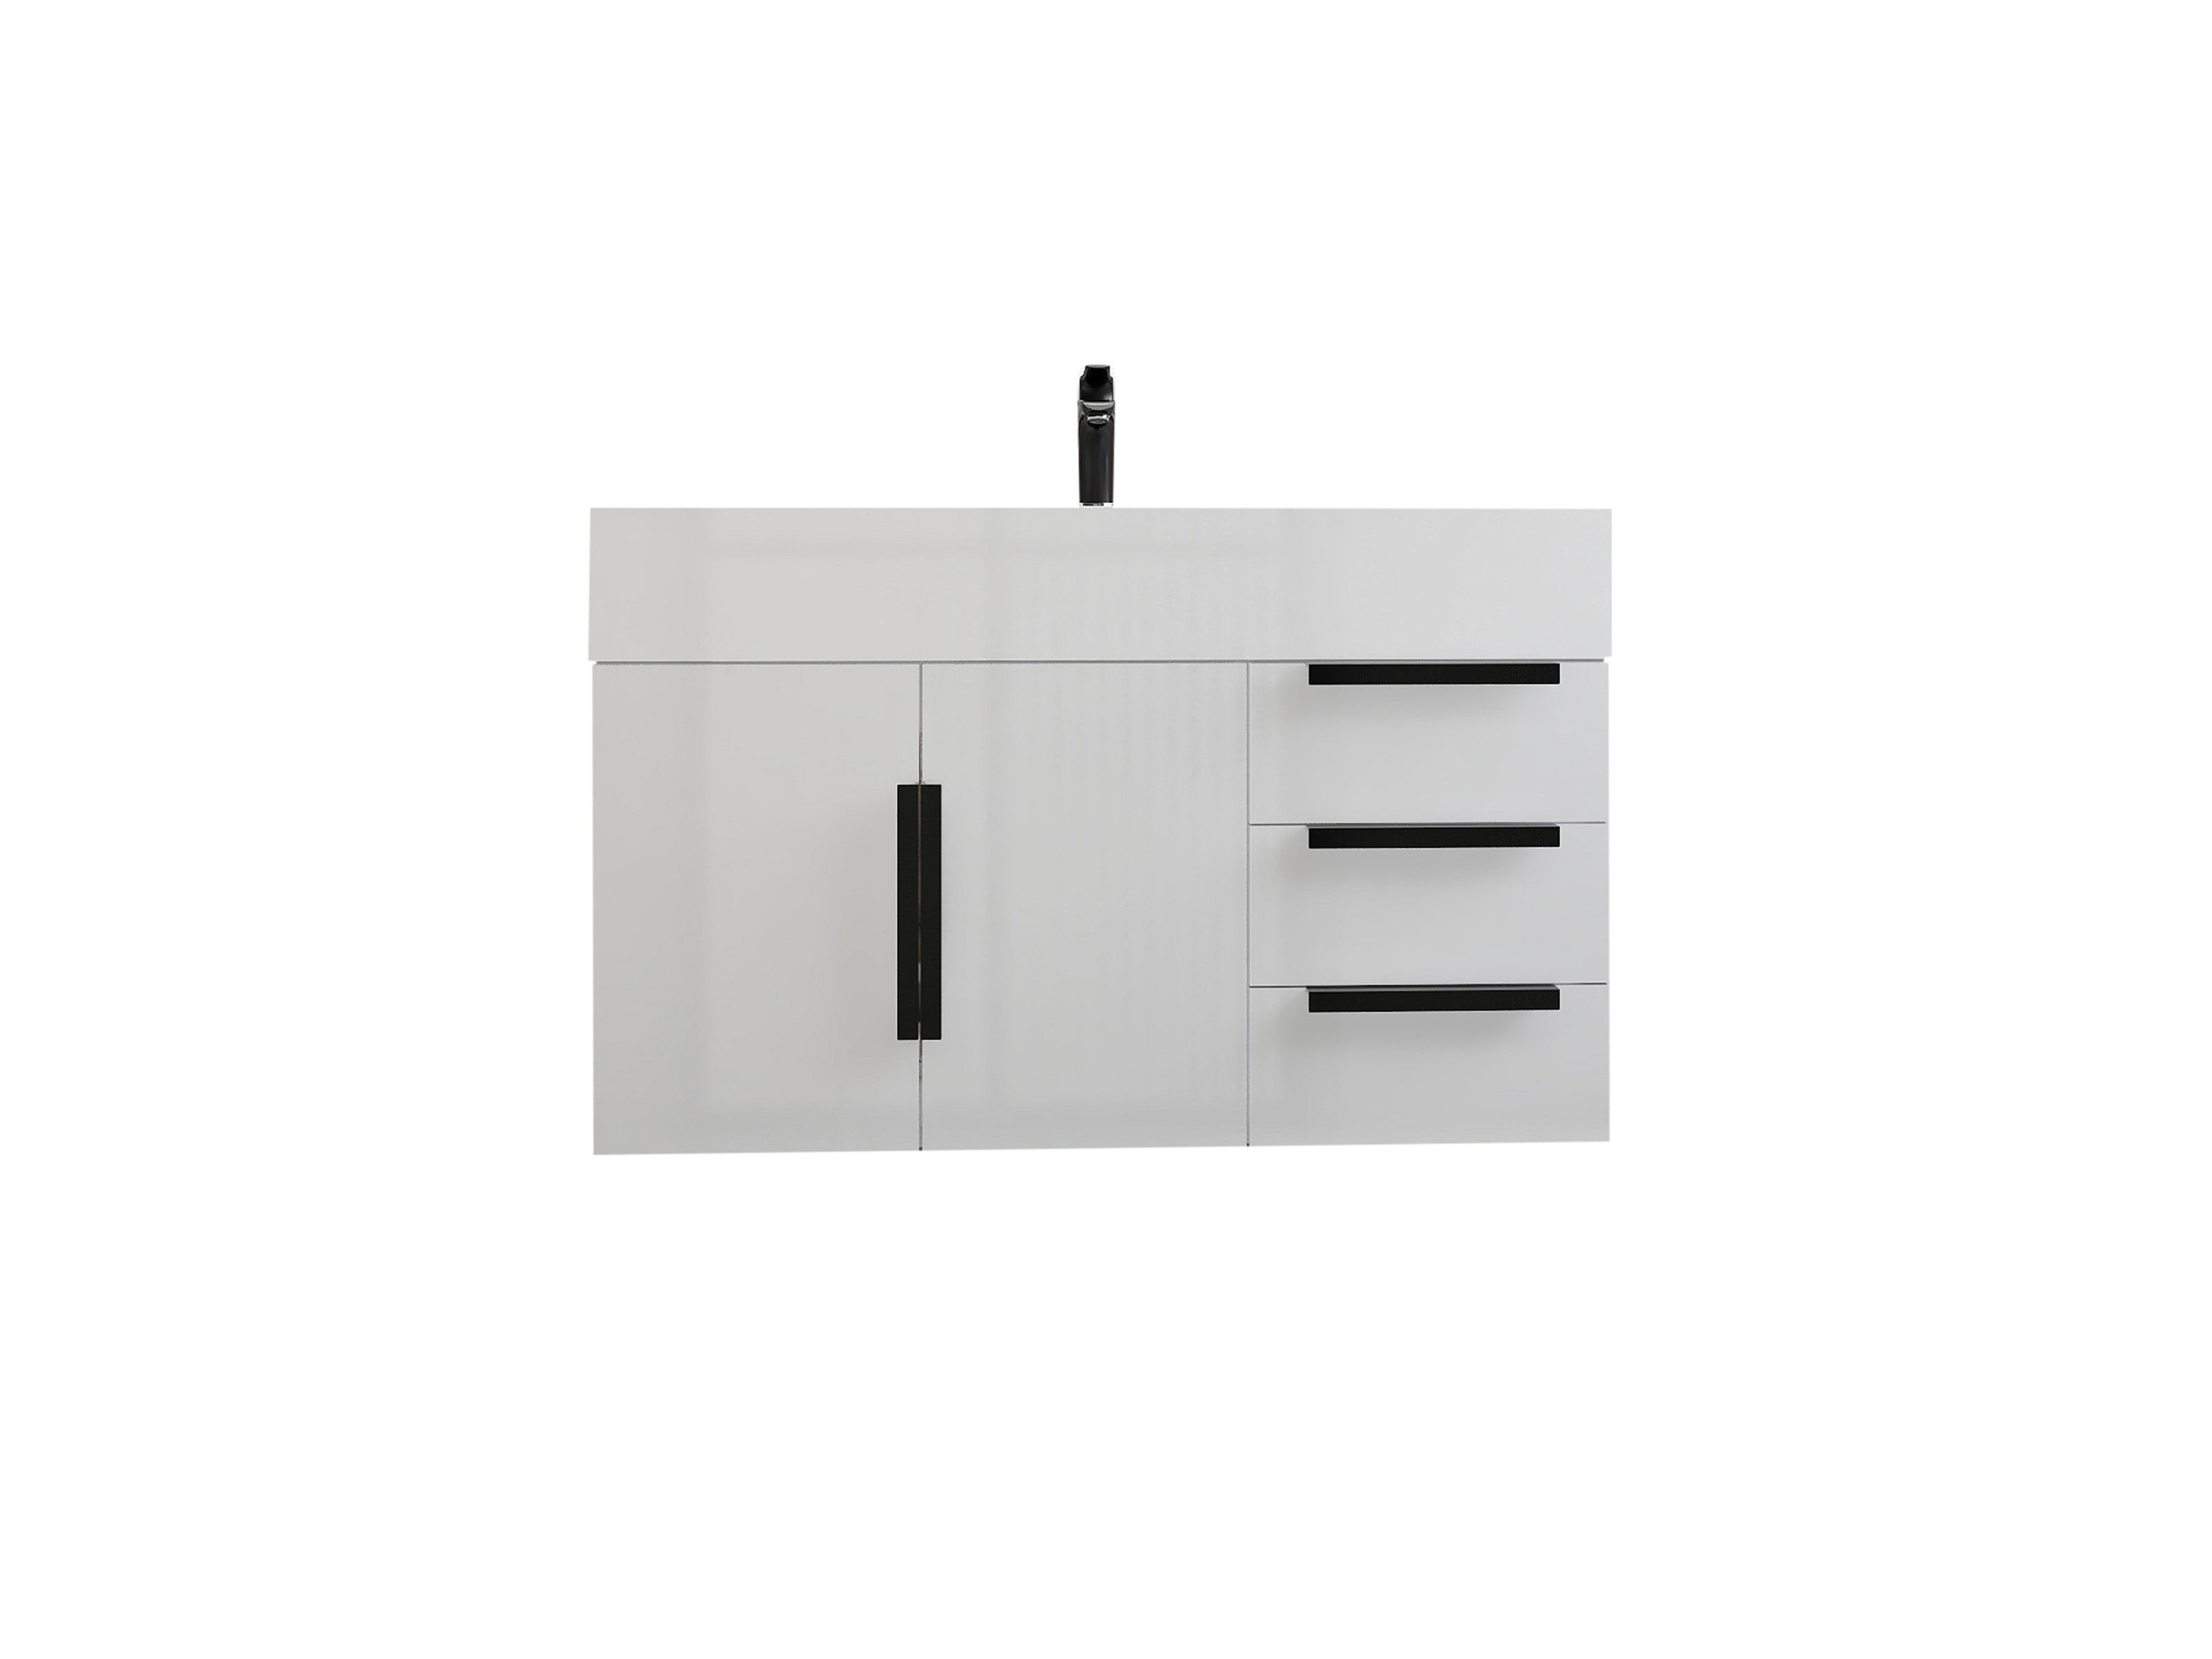 Bethany 36" Wall-Mounted Floating Bathroom Vanity with Reinforced Acrylic Sink in Gloss White with Black Handles | Better Vanity Bath Vanities